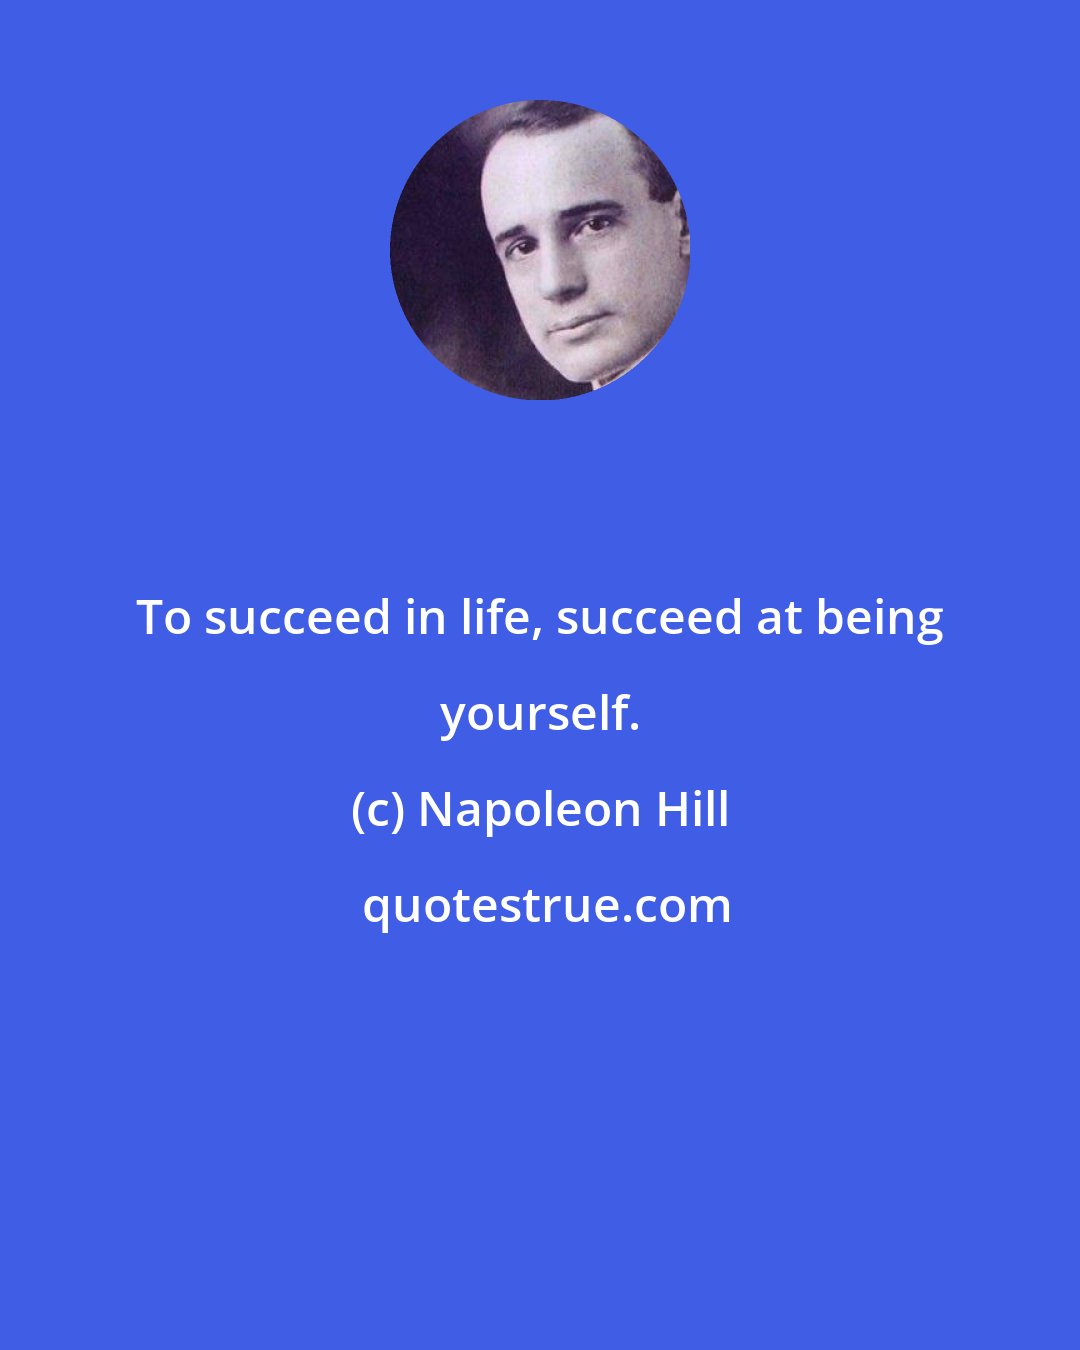 Napoleon Hill: To succeed in life, succeed at being yourself.